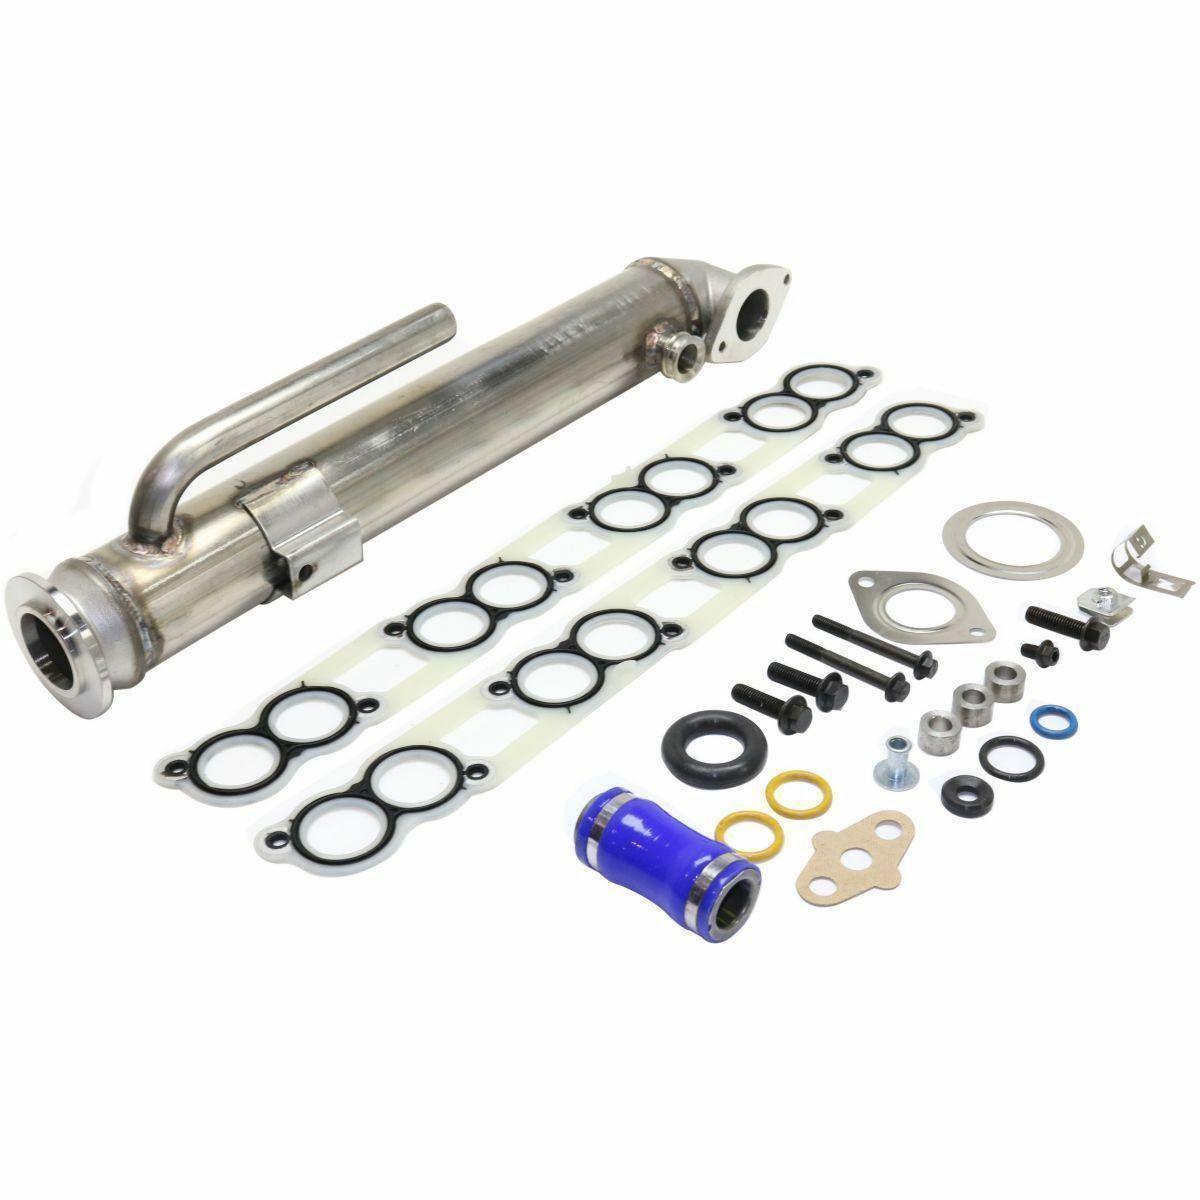 Rudy's Performance Parts - Rudy's Upgraded Round EGR Cooler & Gasket Kit For 03-04 6.0 Powerstroke